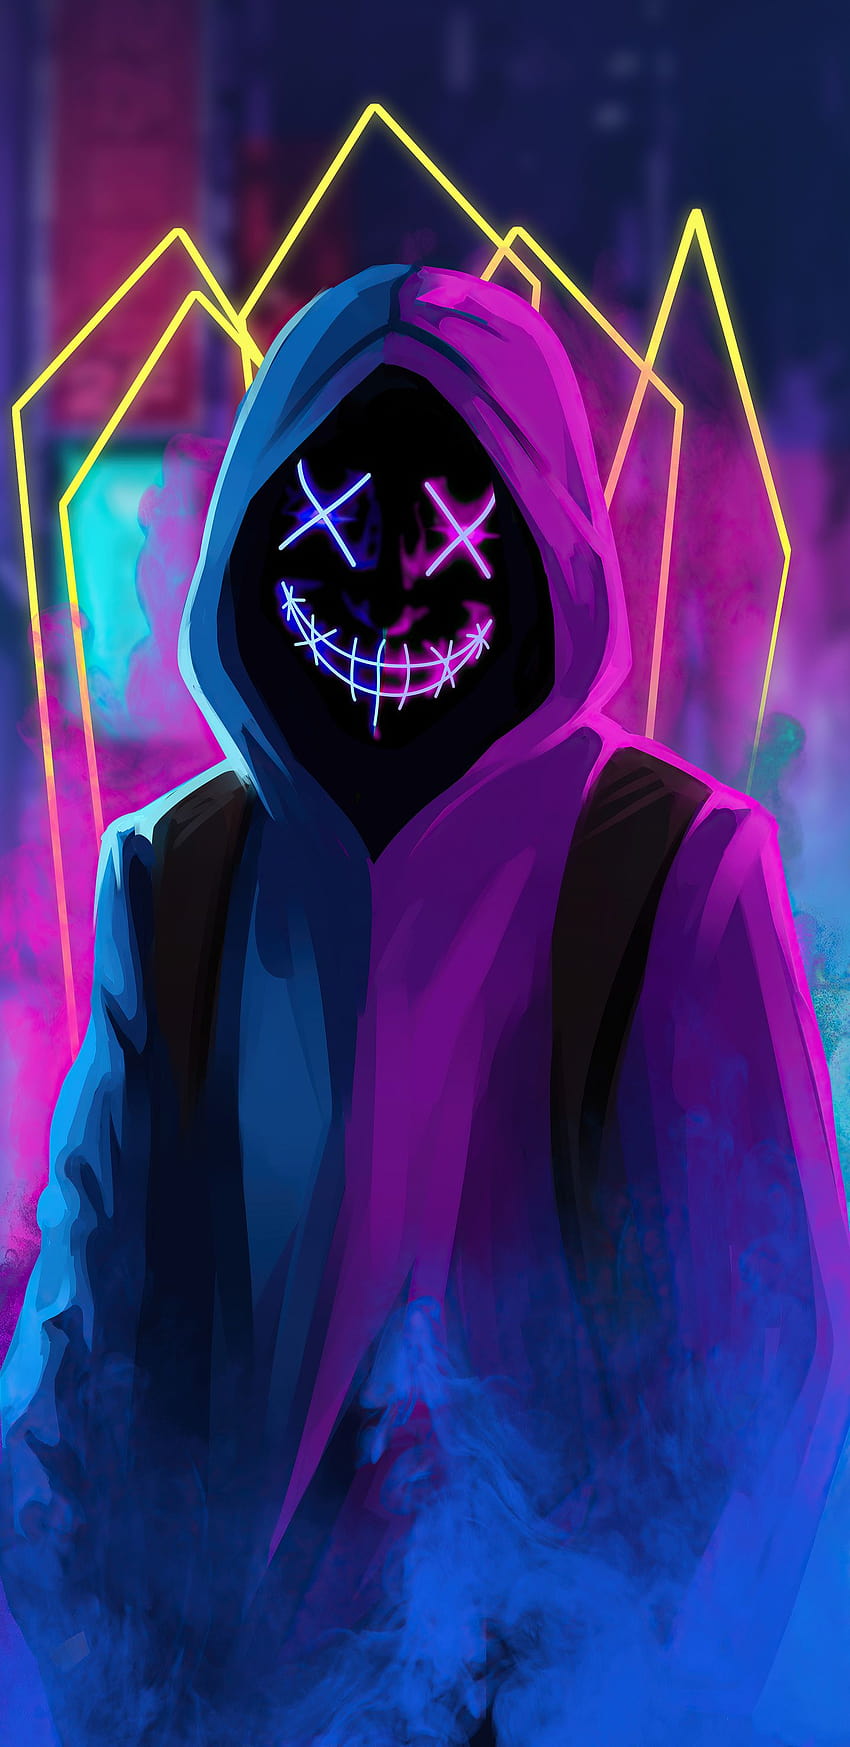 1440x2960 Mask Neon Guy Samsung Galaxy Note 9,8, S9,S8,S Q , Backgrounds, and, purple man HD phone wallpaper